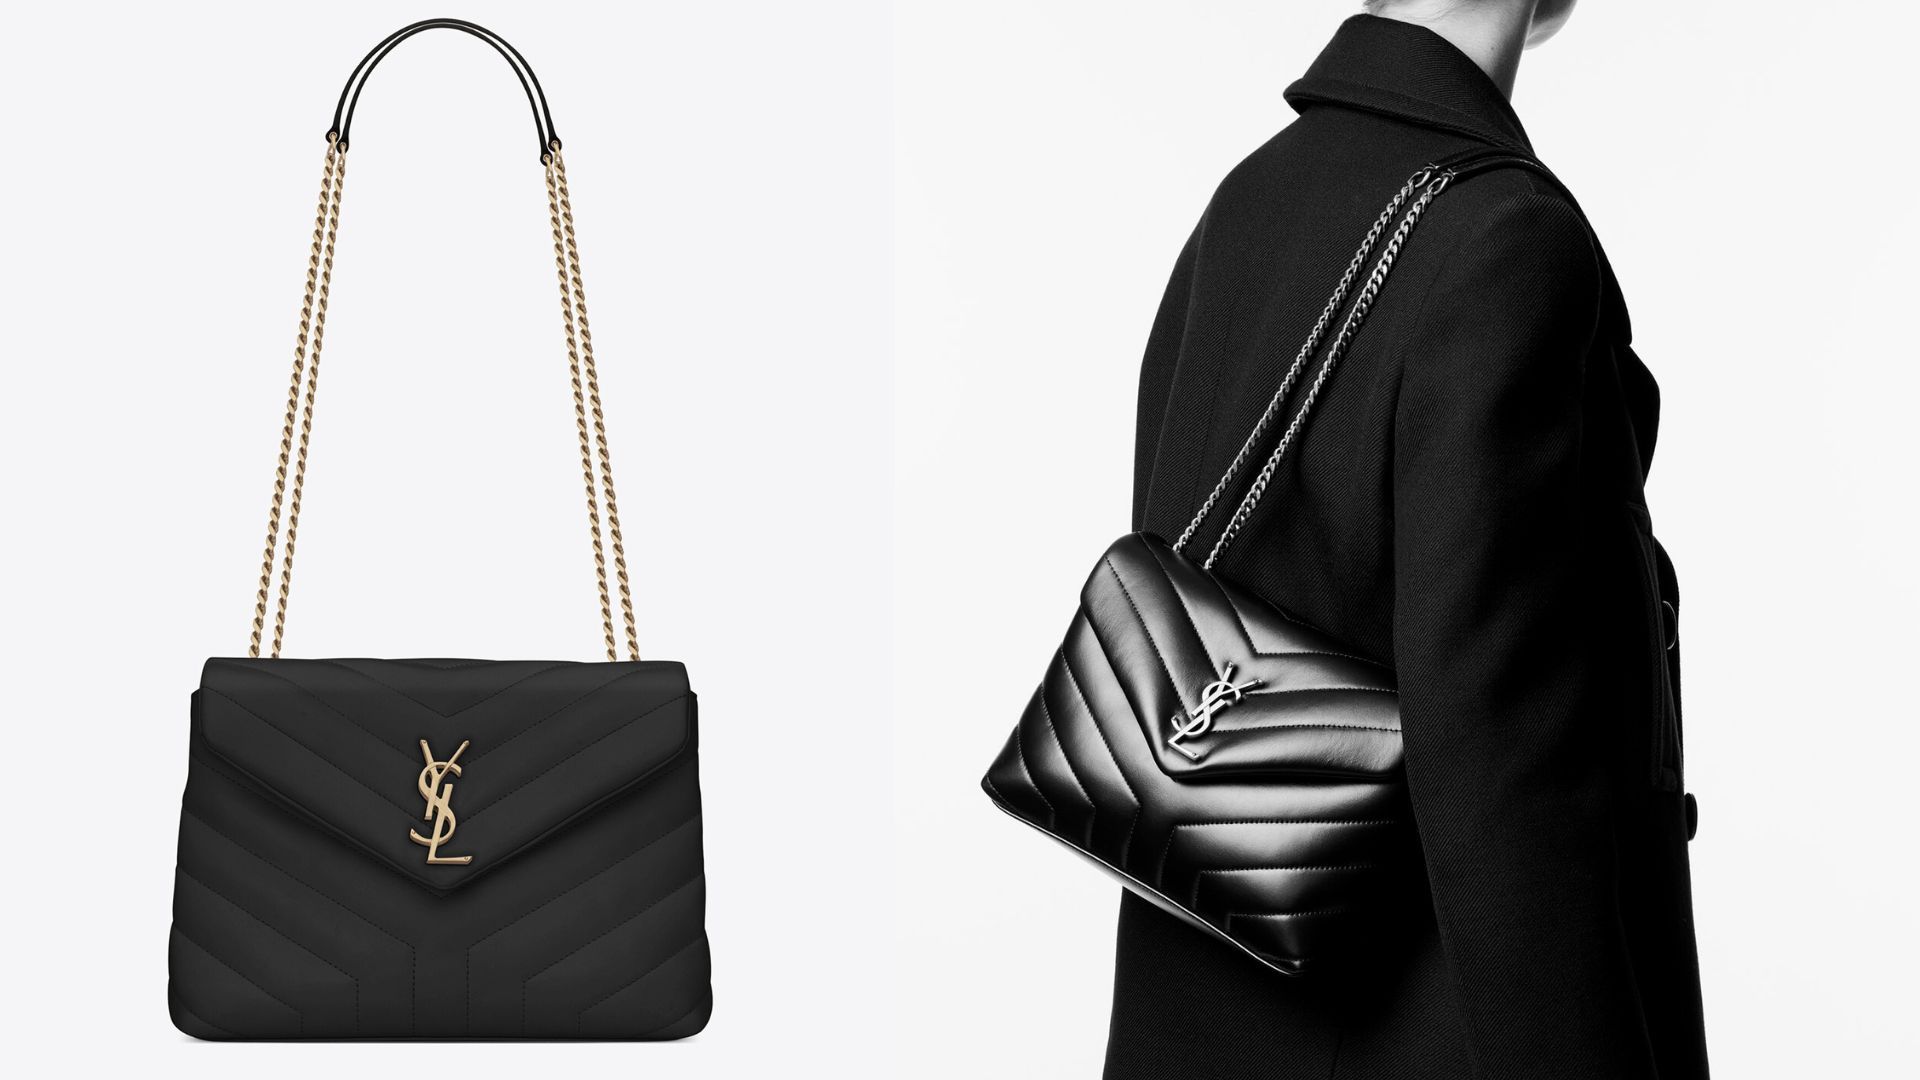 The Best of Saint Laurent Handbags to Add to Your Wardrobe